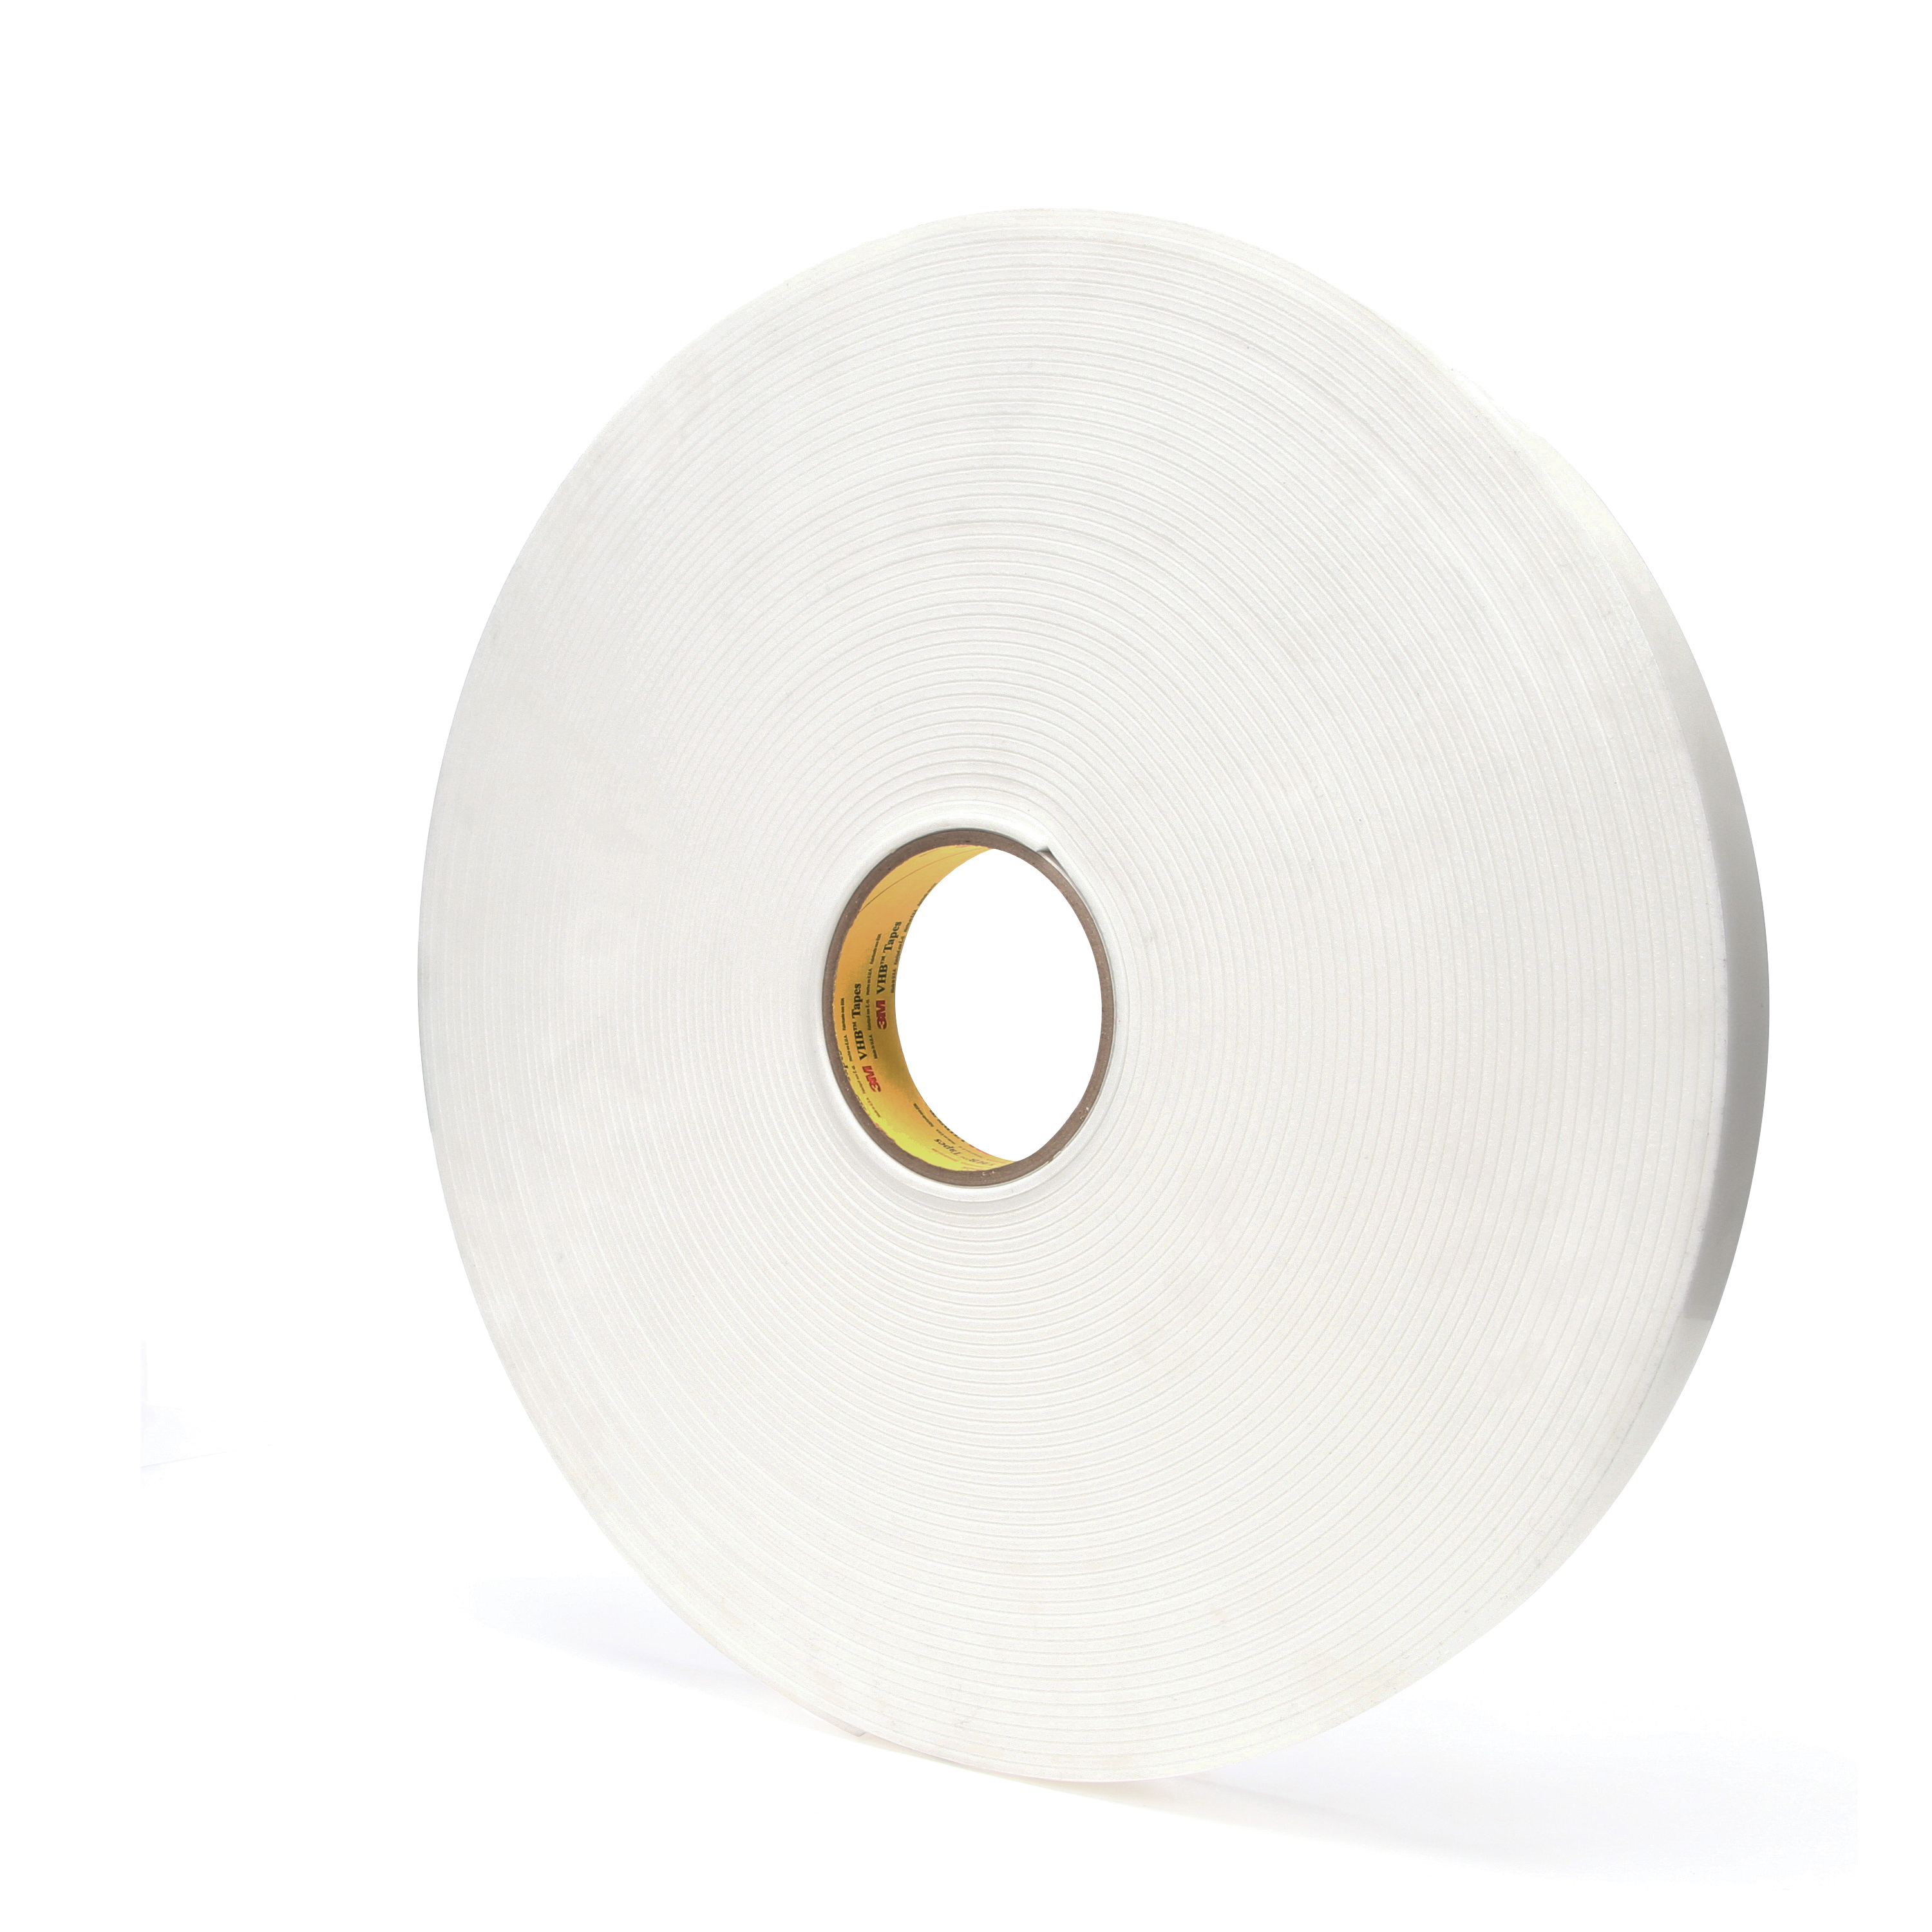 3M™ VHB™ 021200-67505 Pressure Sensitive Double Sided Bonding Tape, 36 yd L x 1 in W, 0.12 in THK, General Purpose Acrylic Adhesive, Acrylic Foam Backing, White